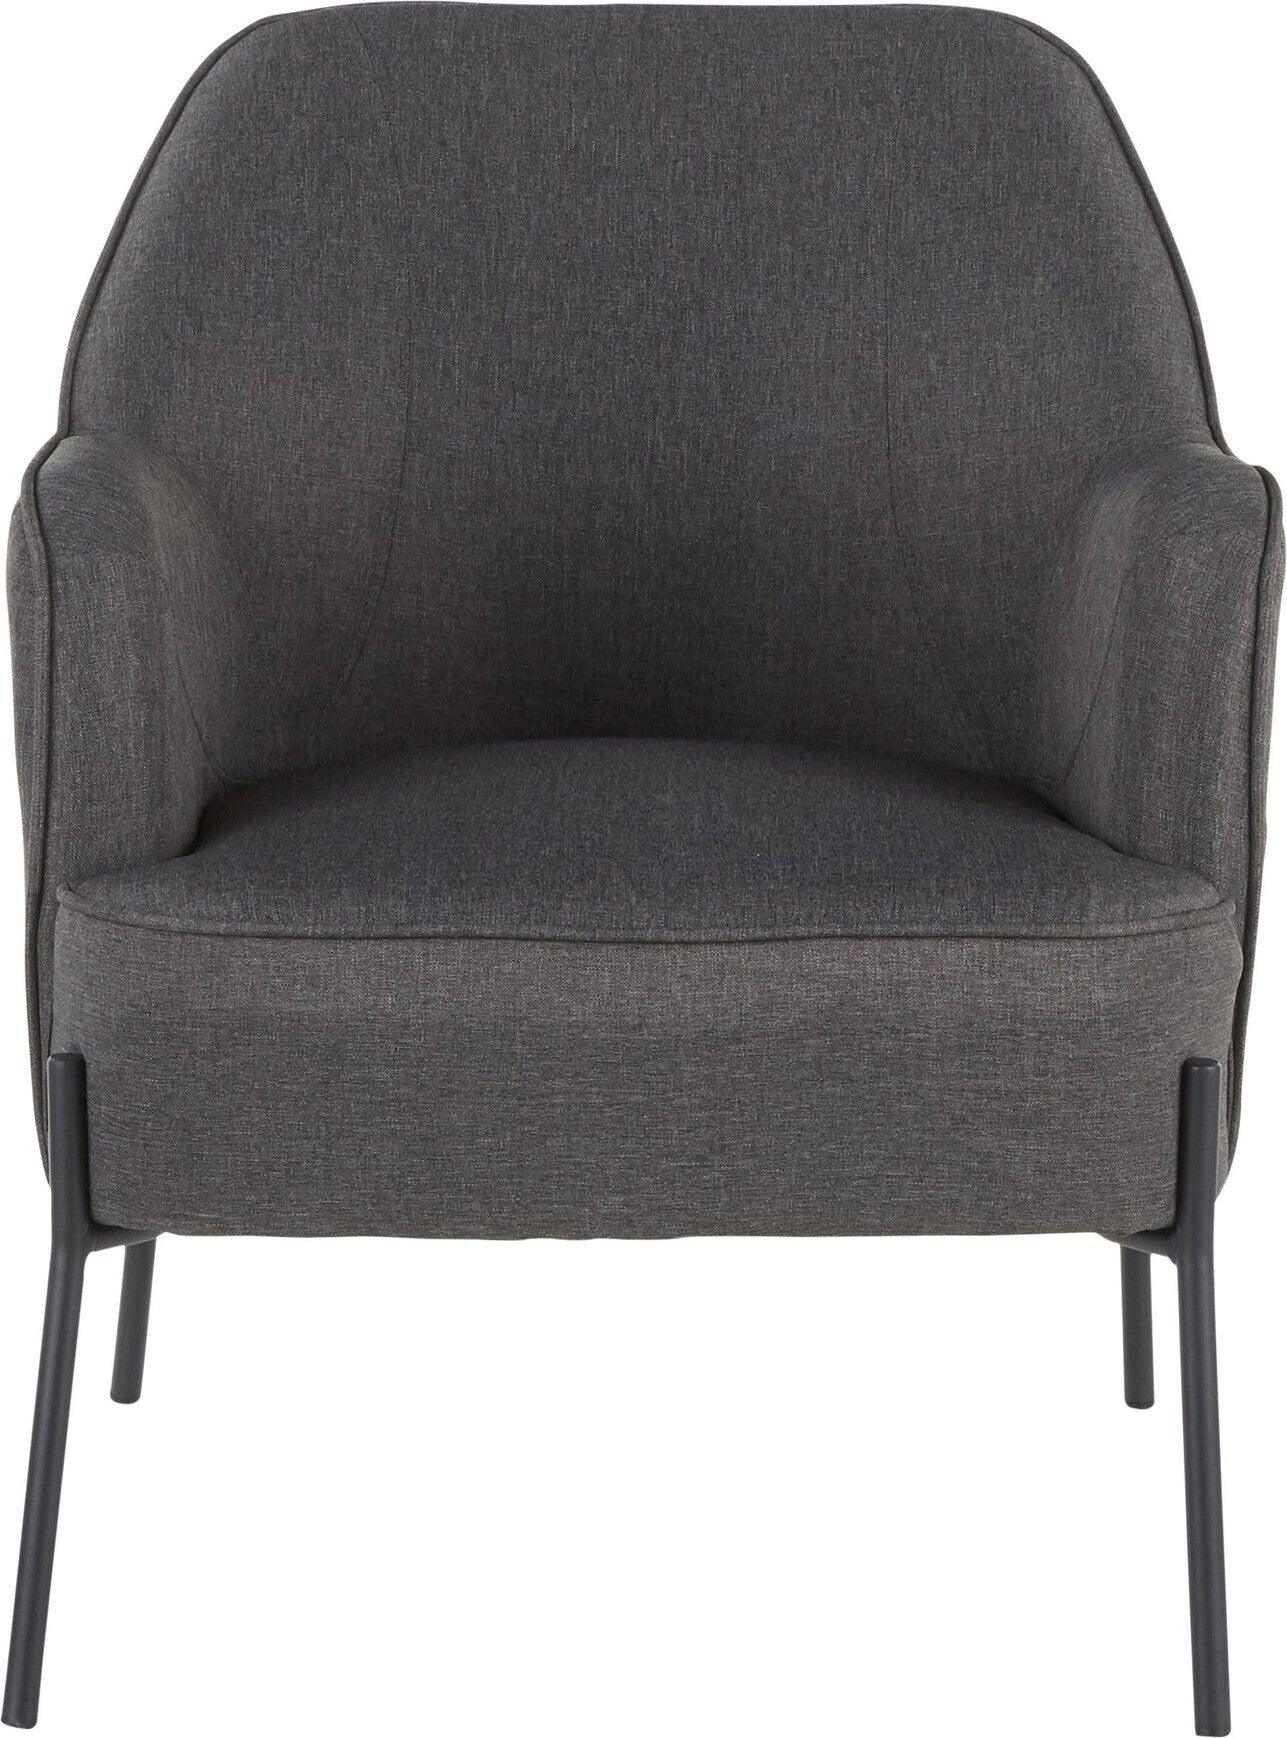 Lumisource Accent Chairs - Daniella Accent Chair Black & Charcoal